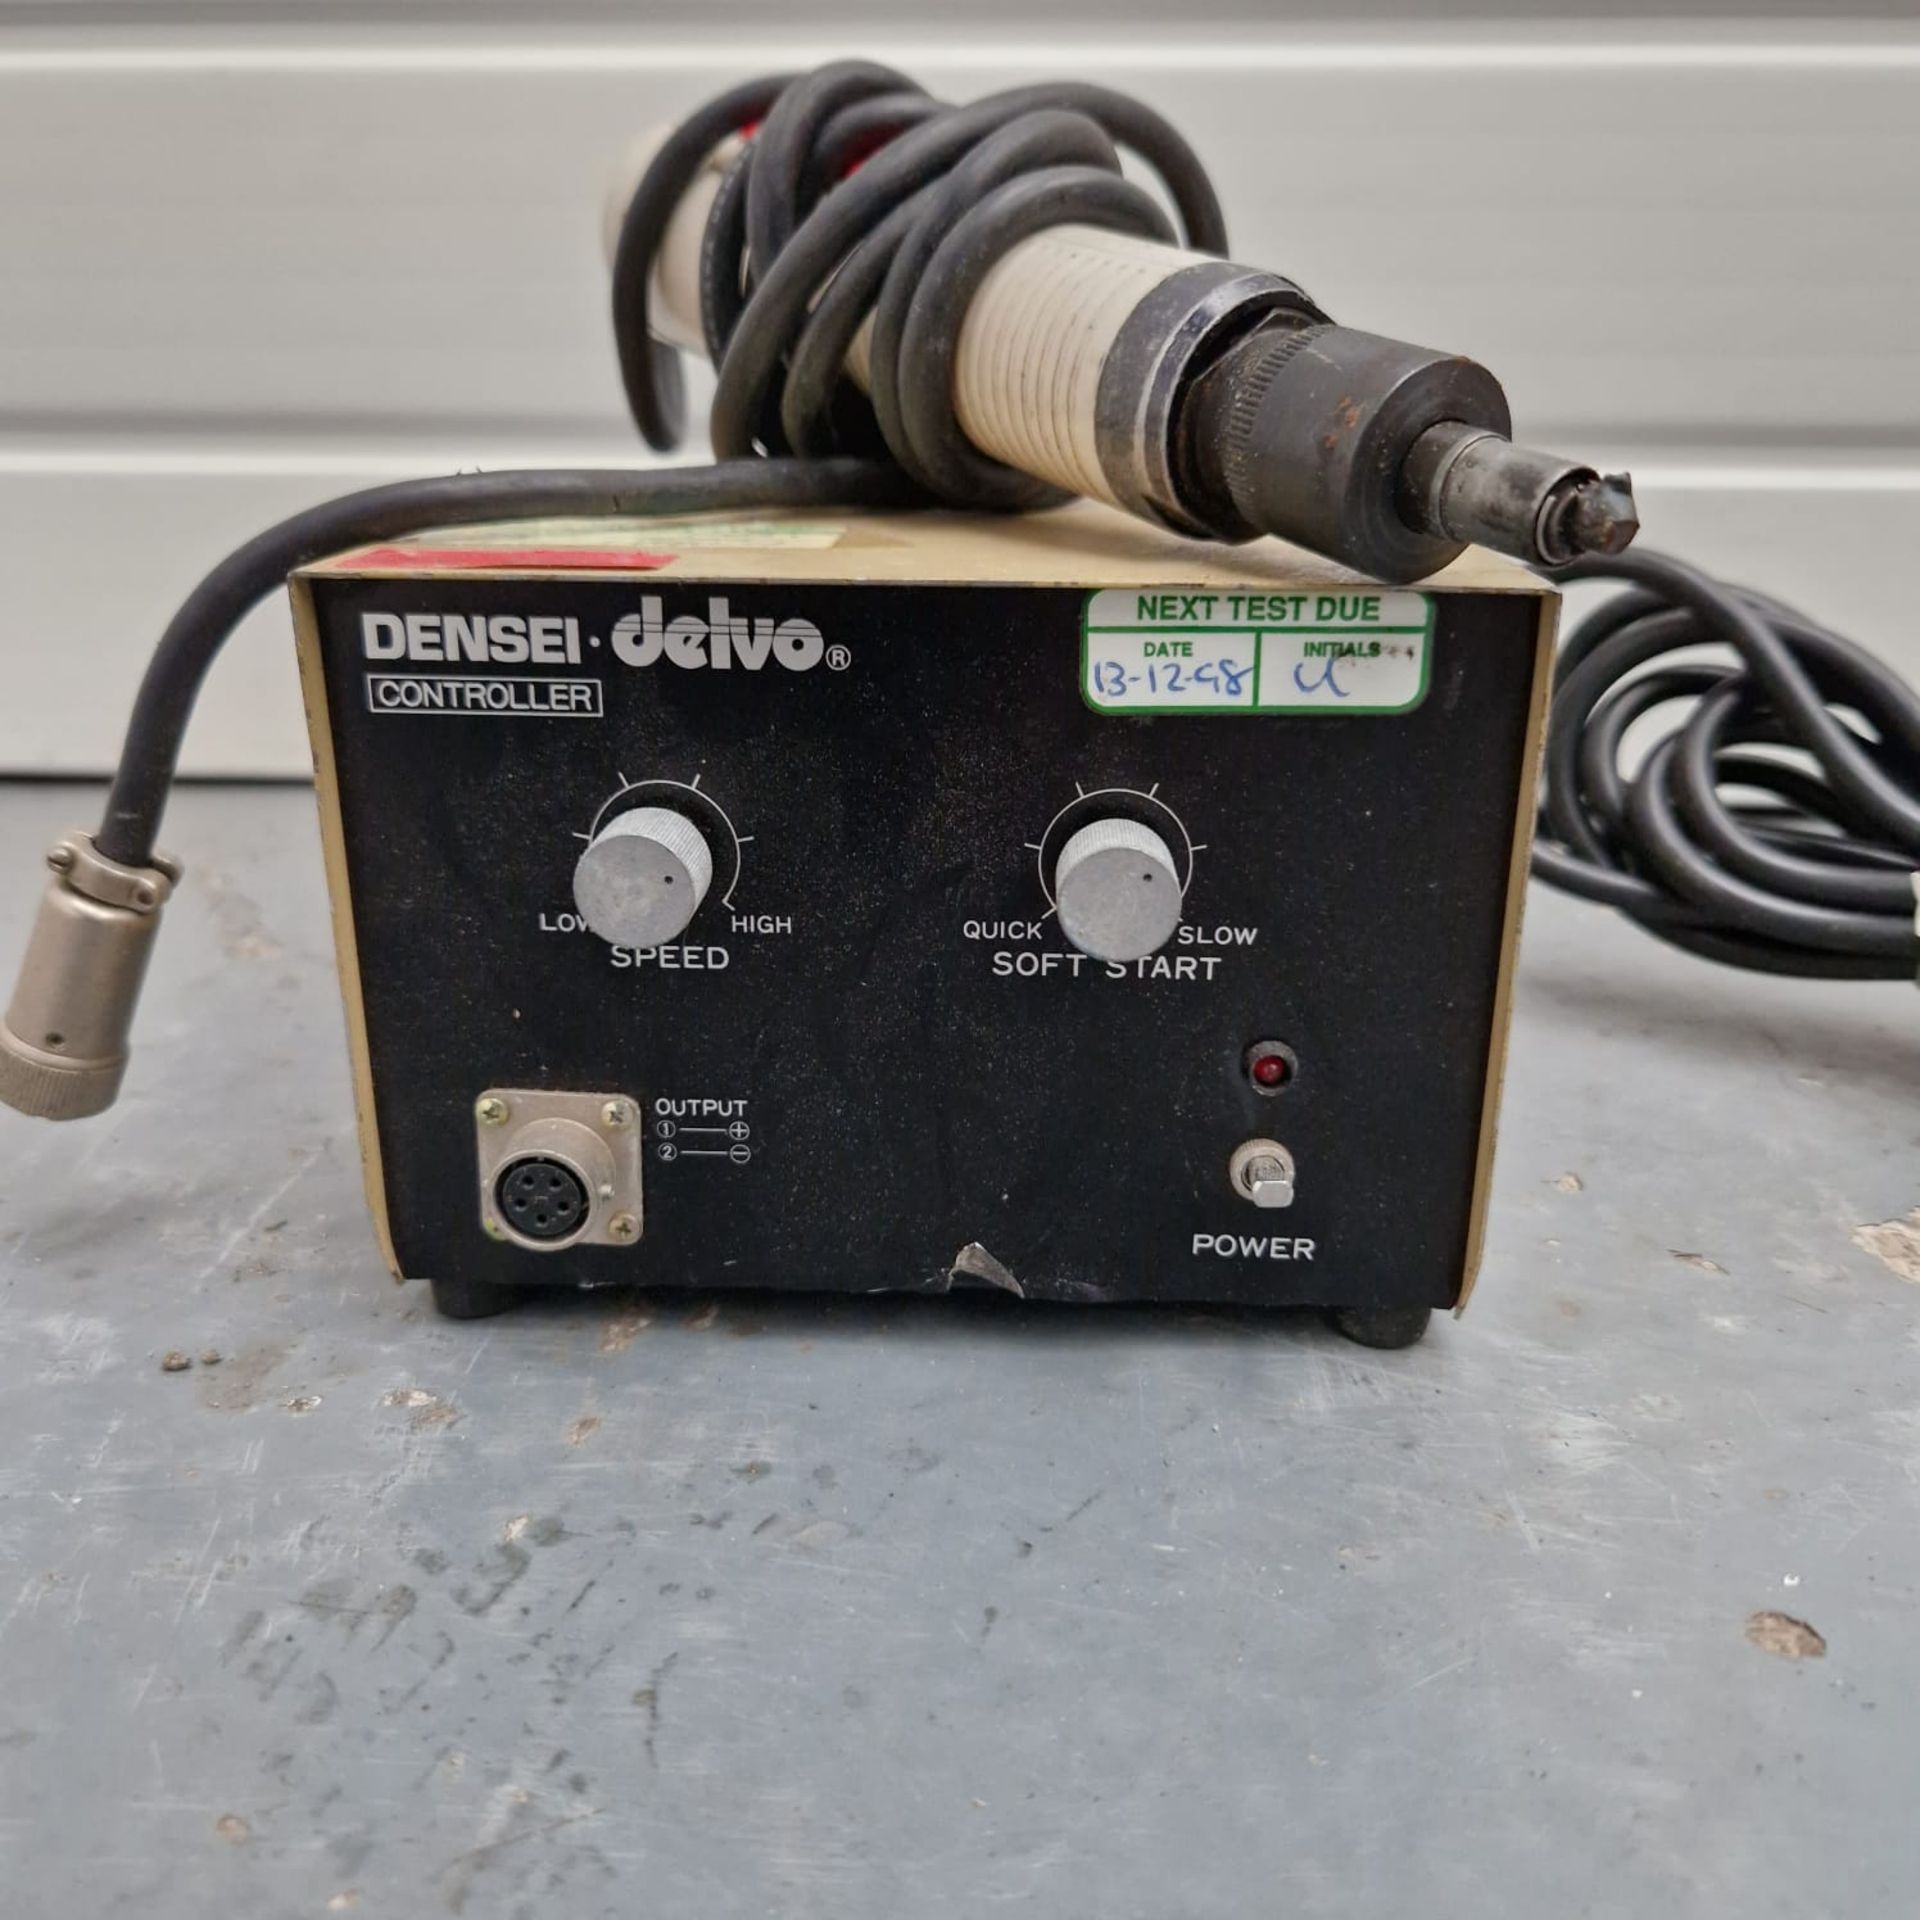 Delvo Electric Screwdriver with Screwdriver Control Unit. - Image 3 of 6